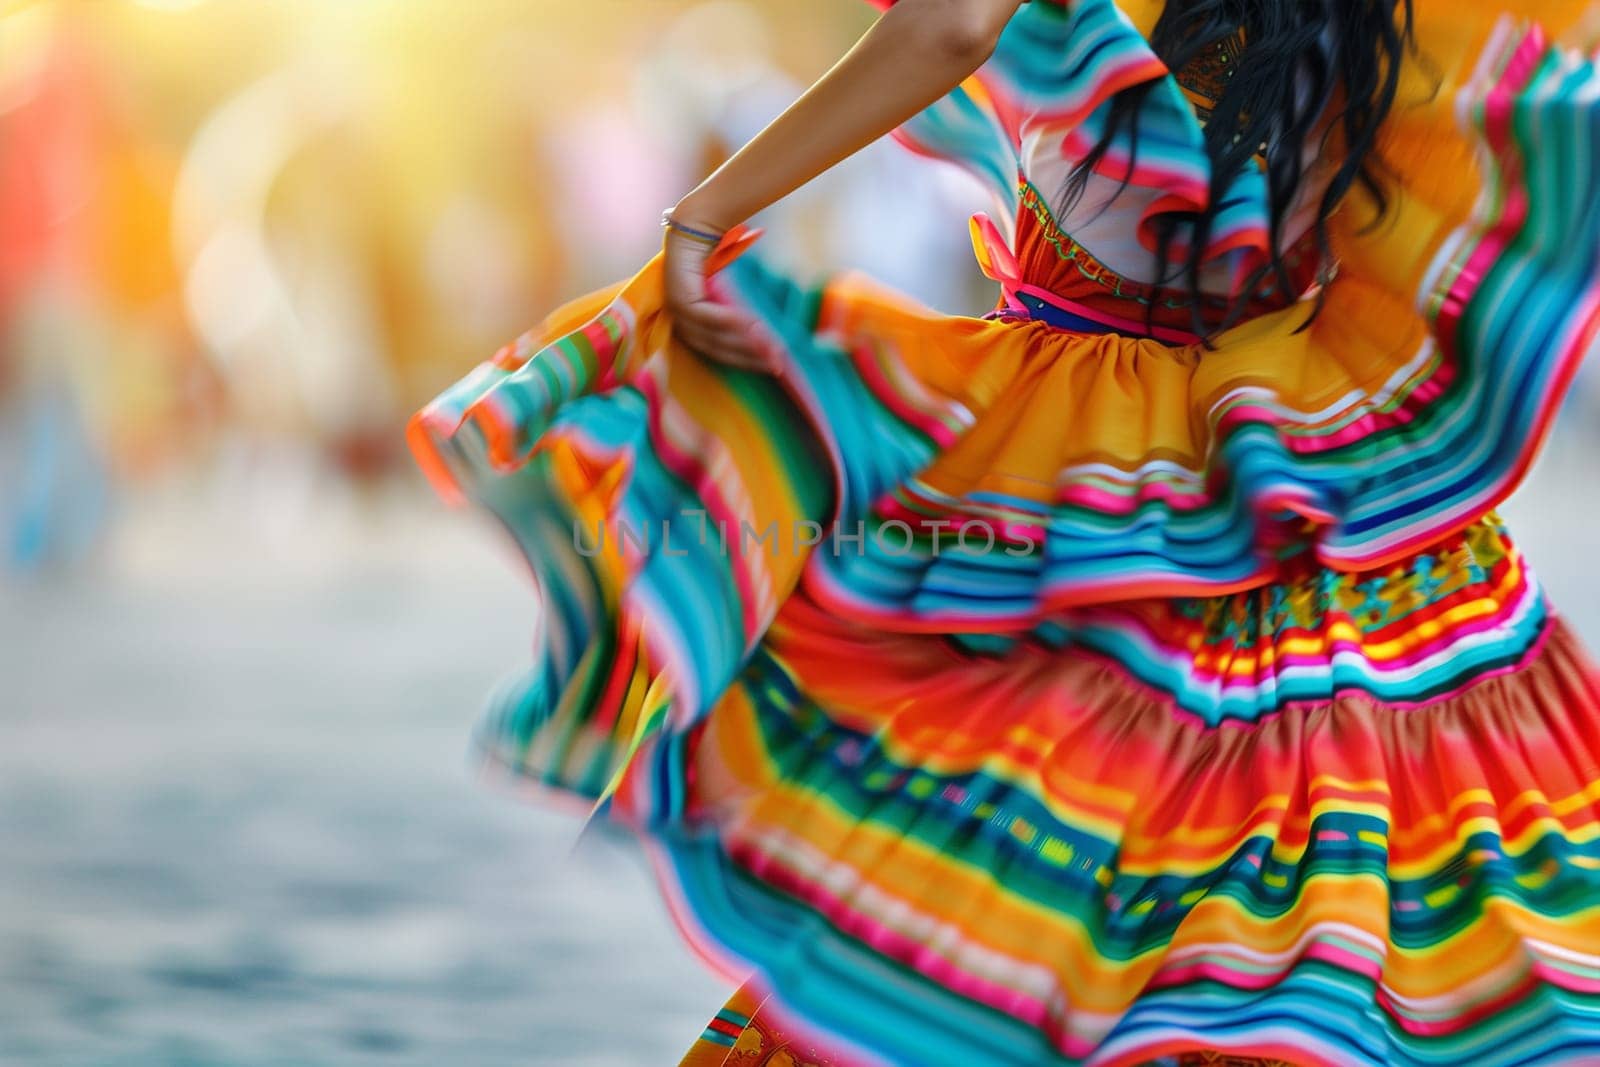 Woman in Colorful Dress Dancing on the Street by Sd28DimoN_1976